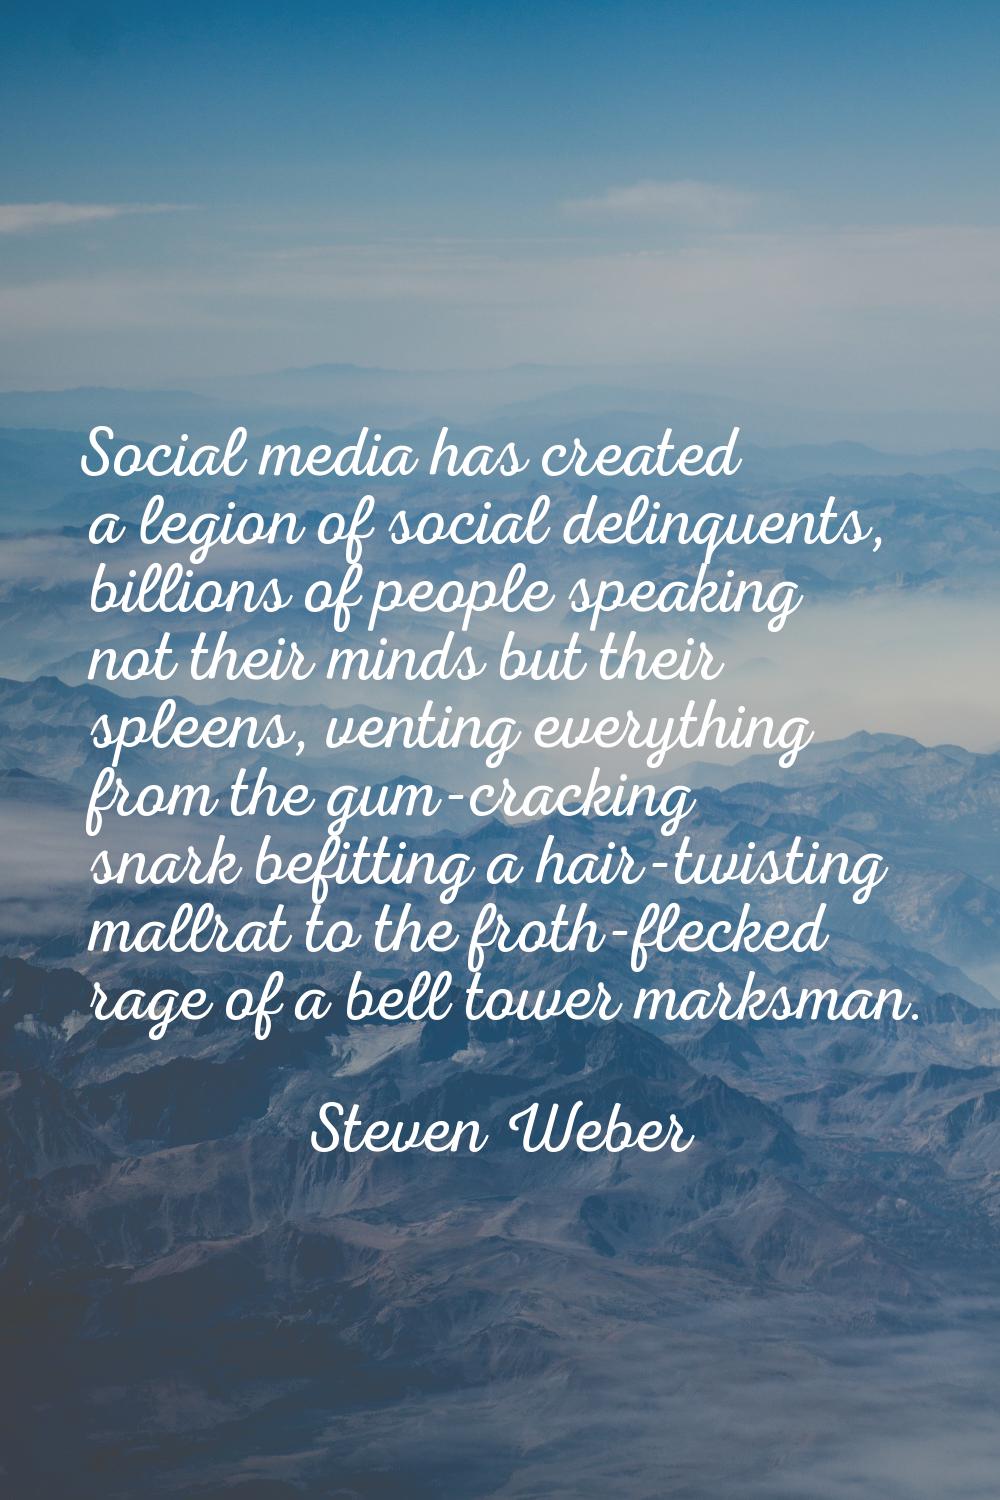 Social media has created a legion of social delinquents, billions of people speaking not their mind